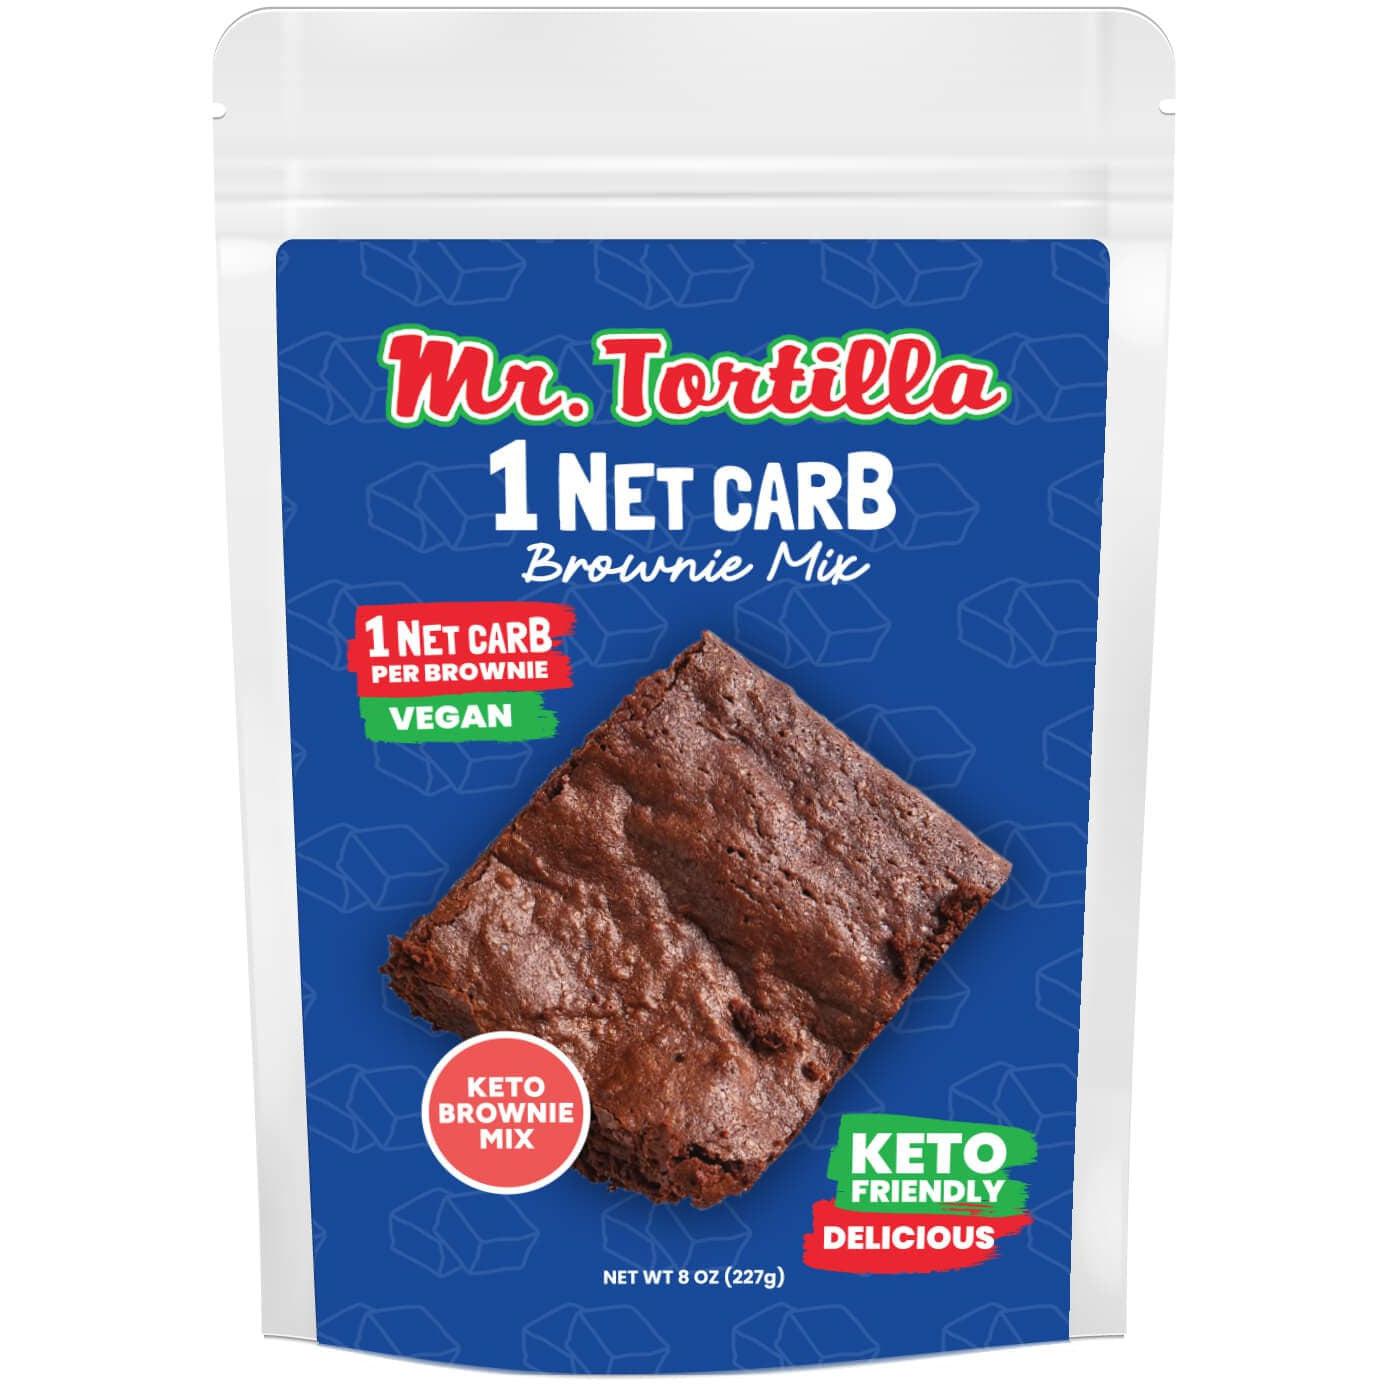 Image of Mr. Tortilla's 1 Net Carb Brownie Mix